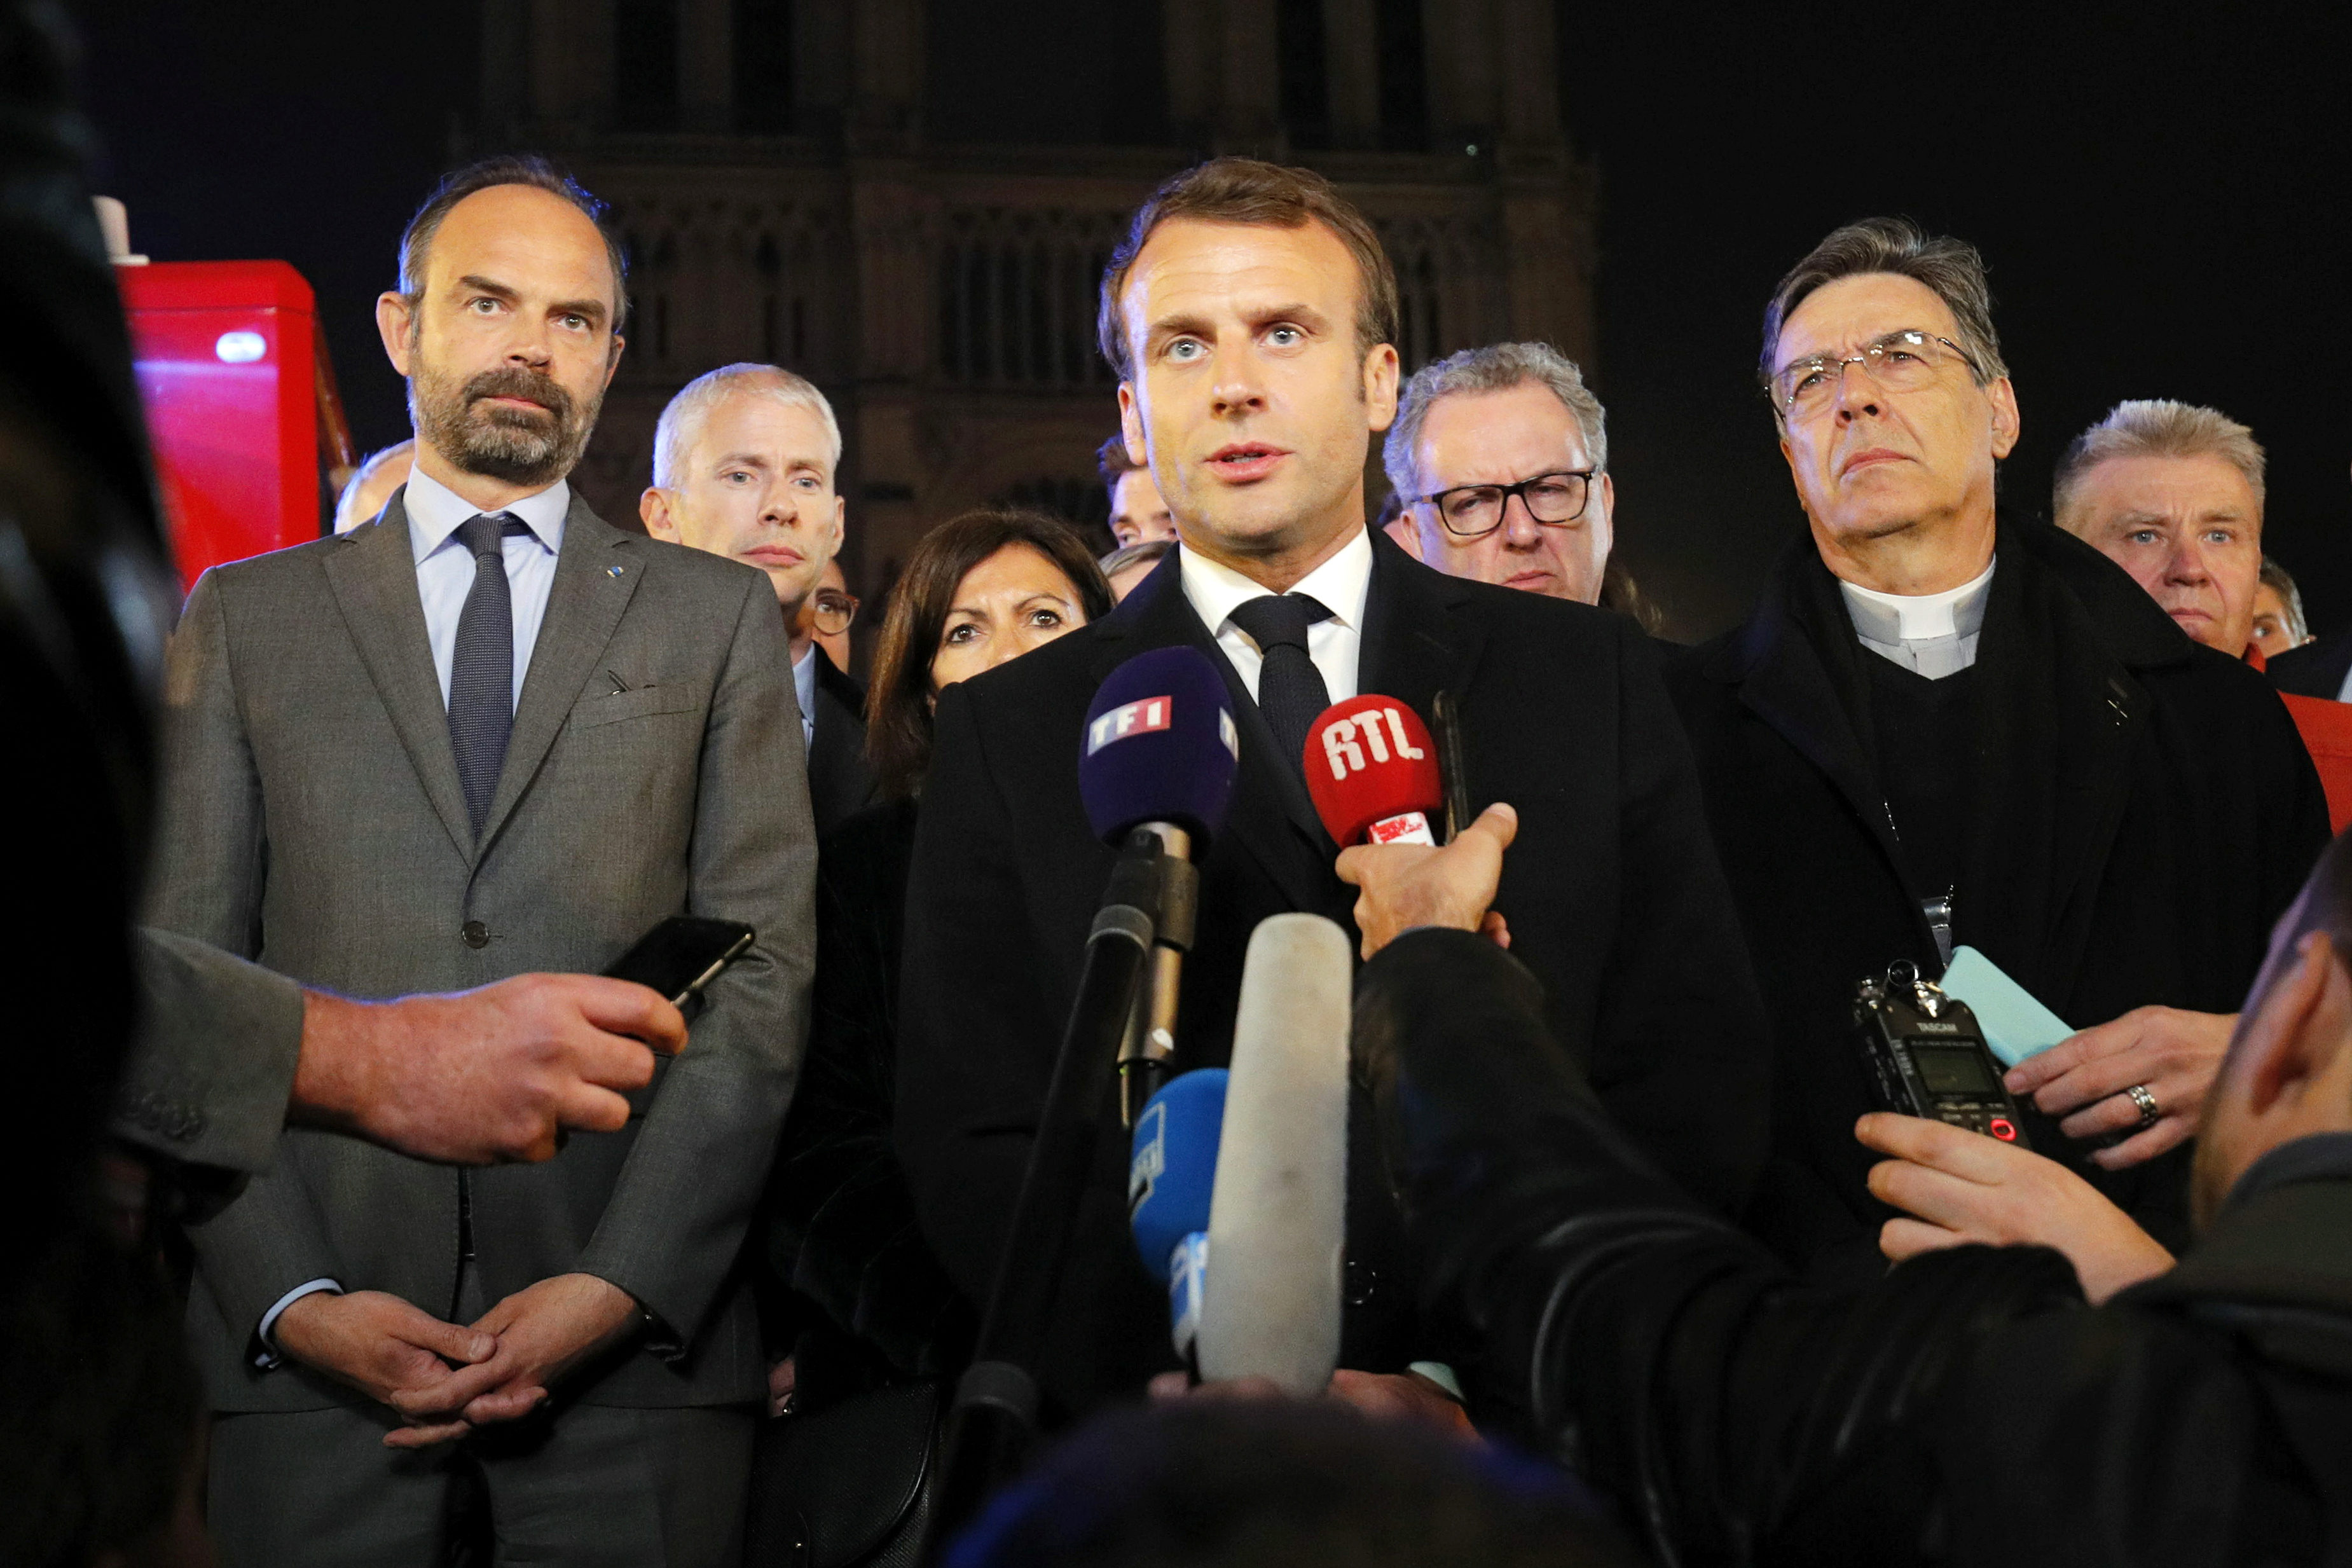 Archbishop of Paris Michel Aupetit, right, accompanies President Emmanuel Macron and other officials as he speaks outside Notre Dame Cathedral.